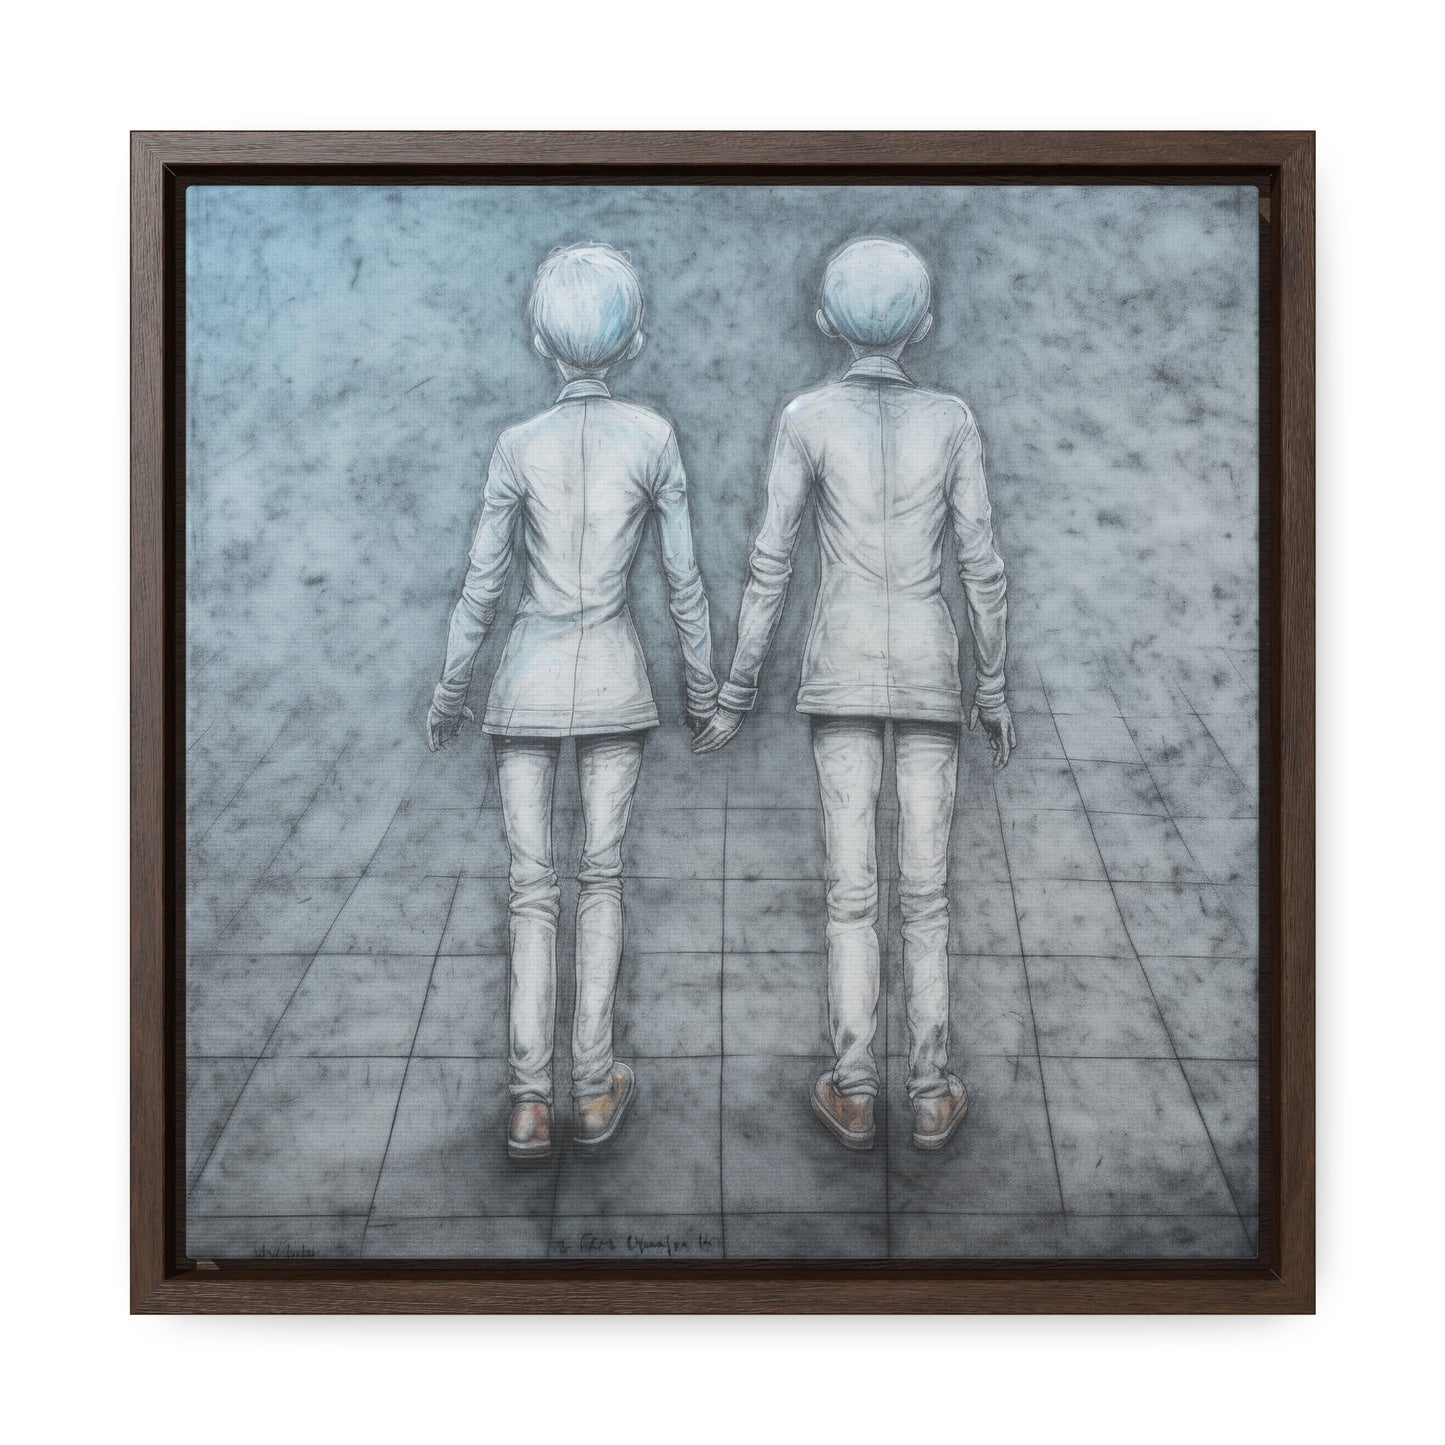 The Courage of Vulnerability 2, Valentinii, Gallery Canvas Wraps, Square Frame